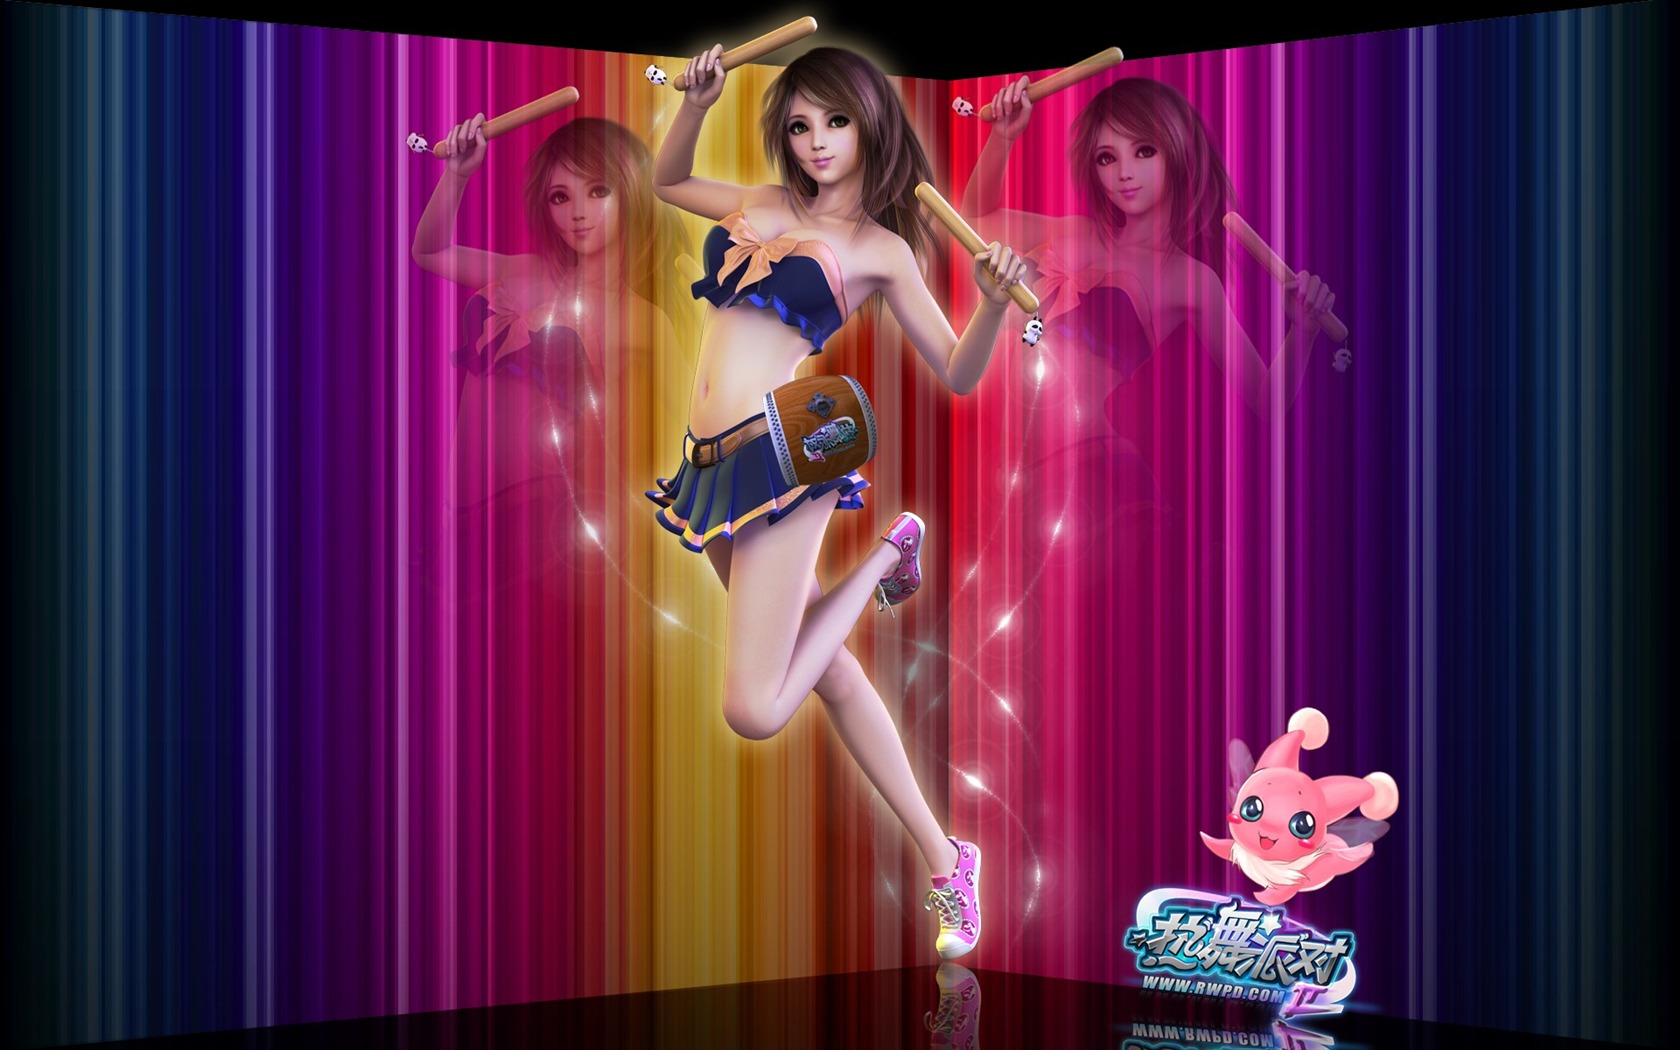 Online game Hot Dance Party II official wallpapers #18 - 1680x1050